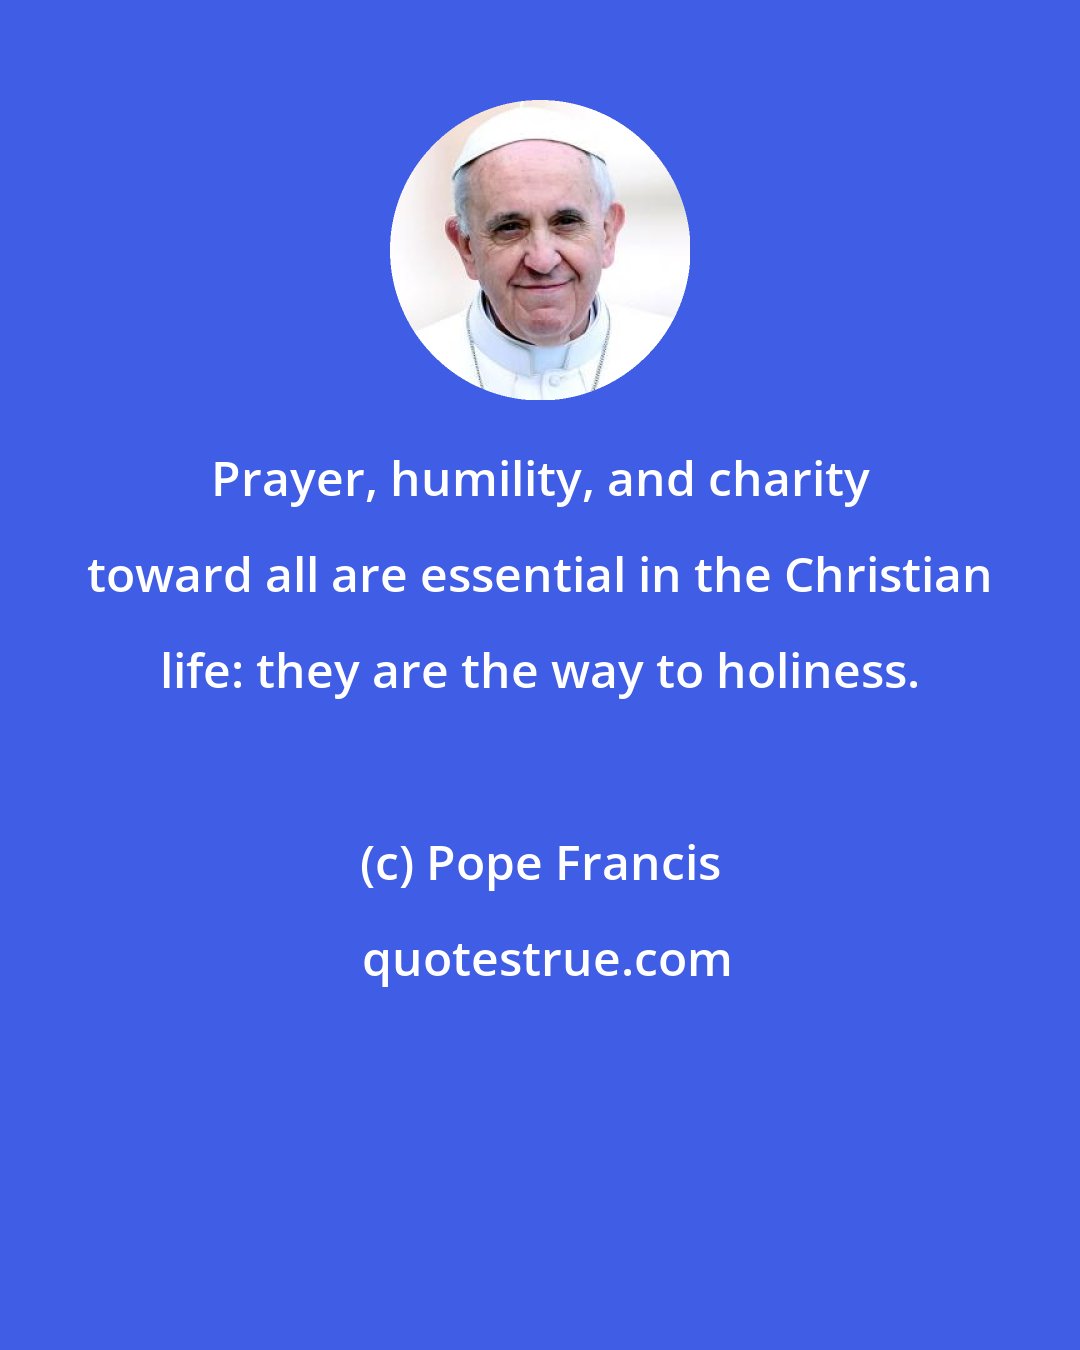 Pope Francis: Prayer, humility, and charity toward all are essential in the Christian life: they are the way to holiness.